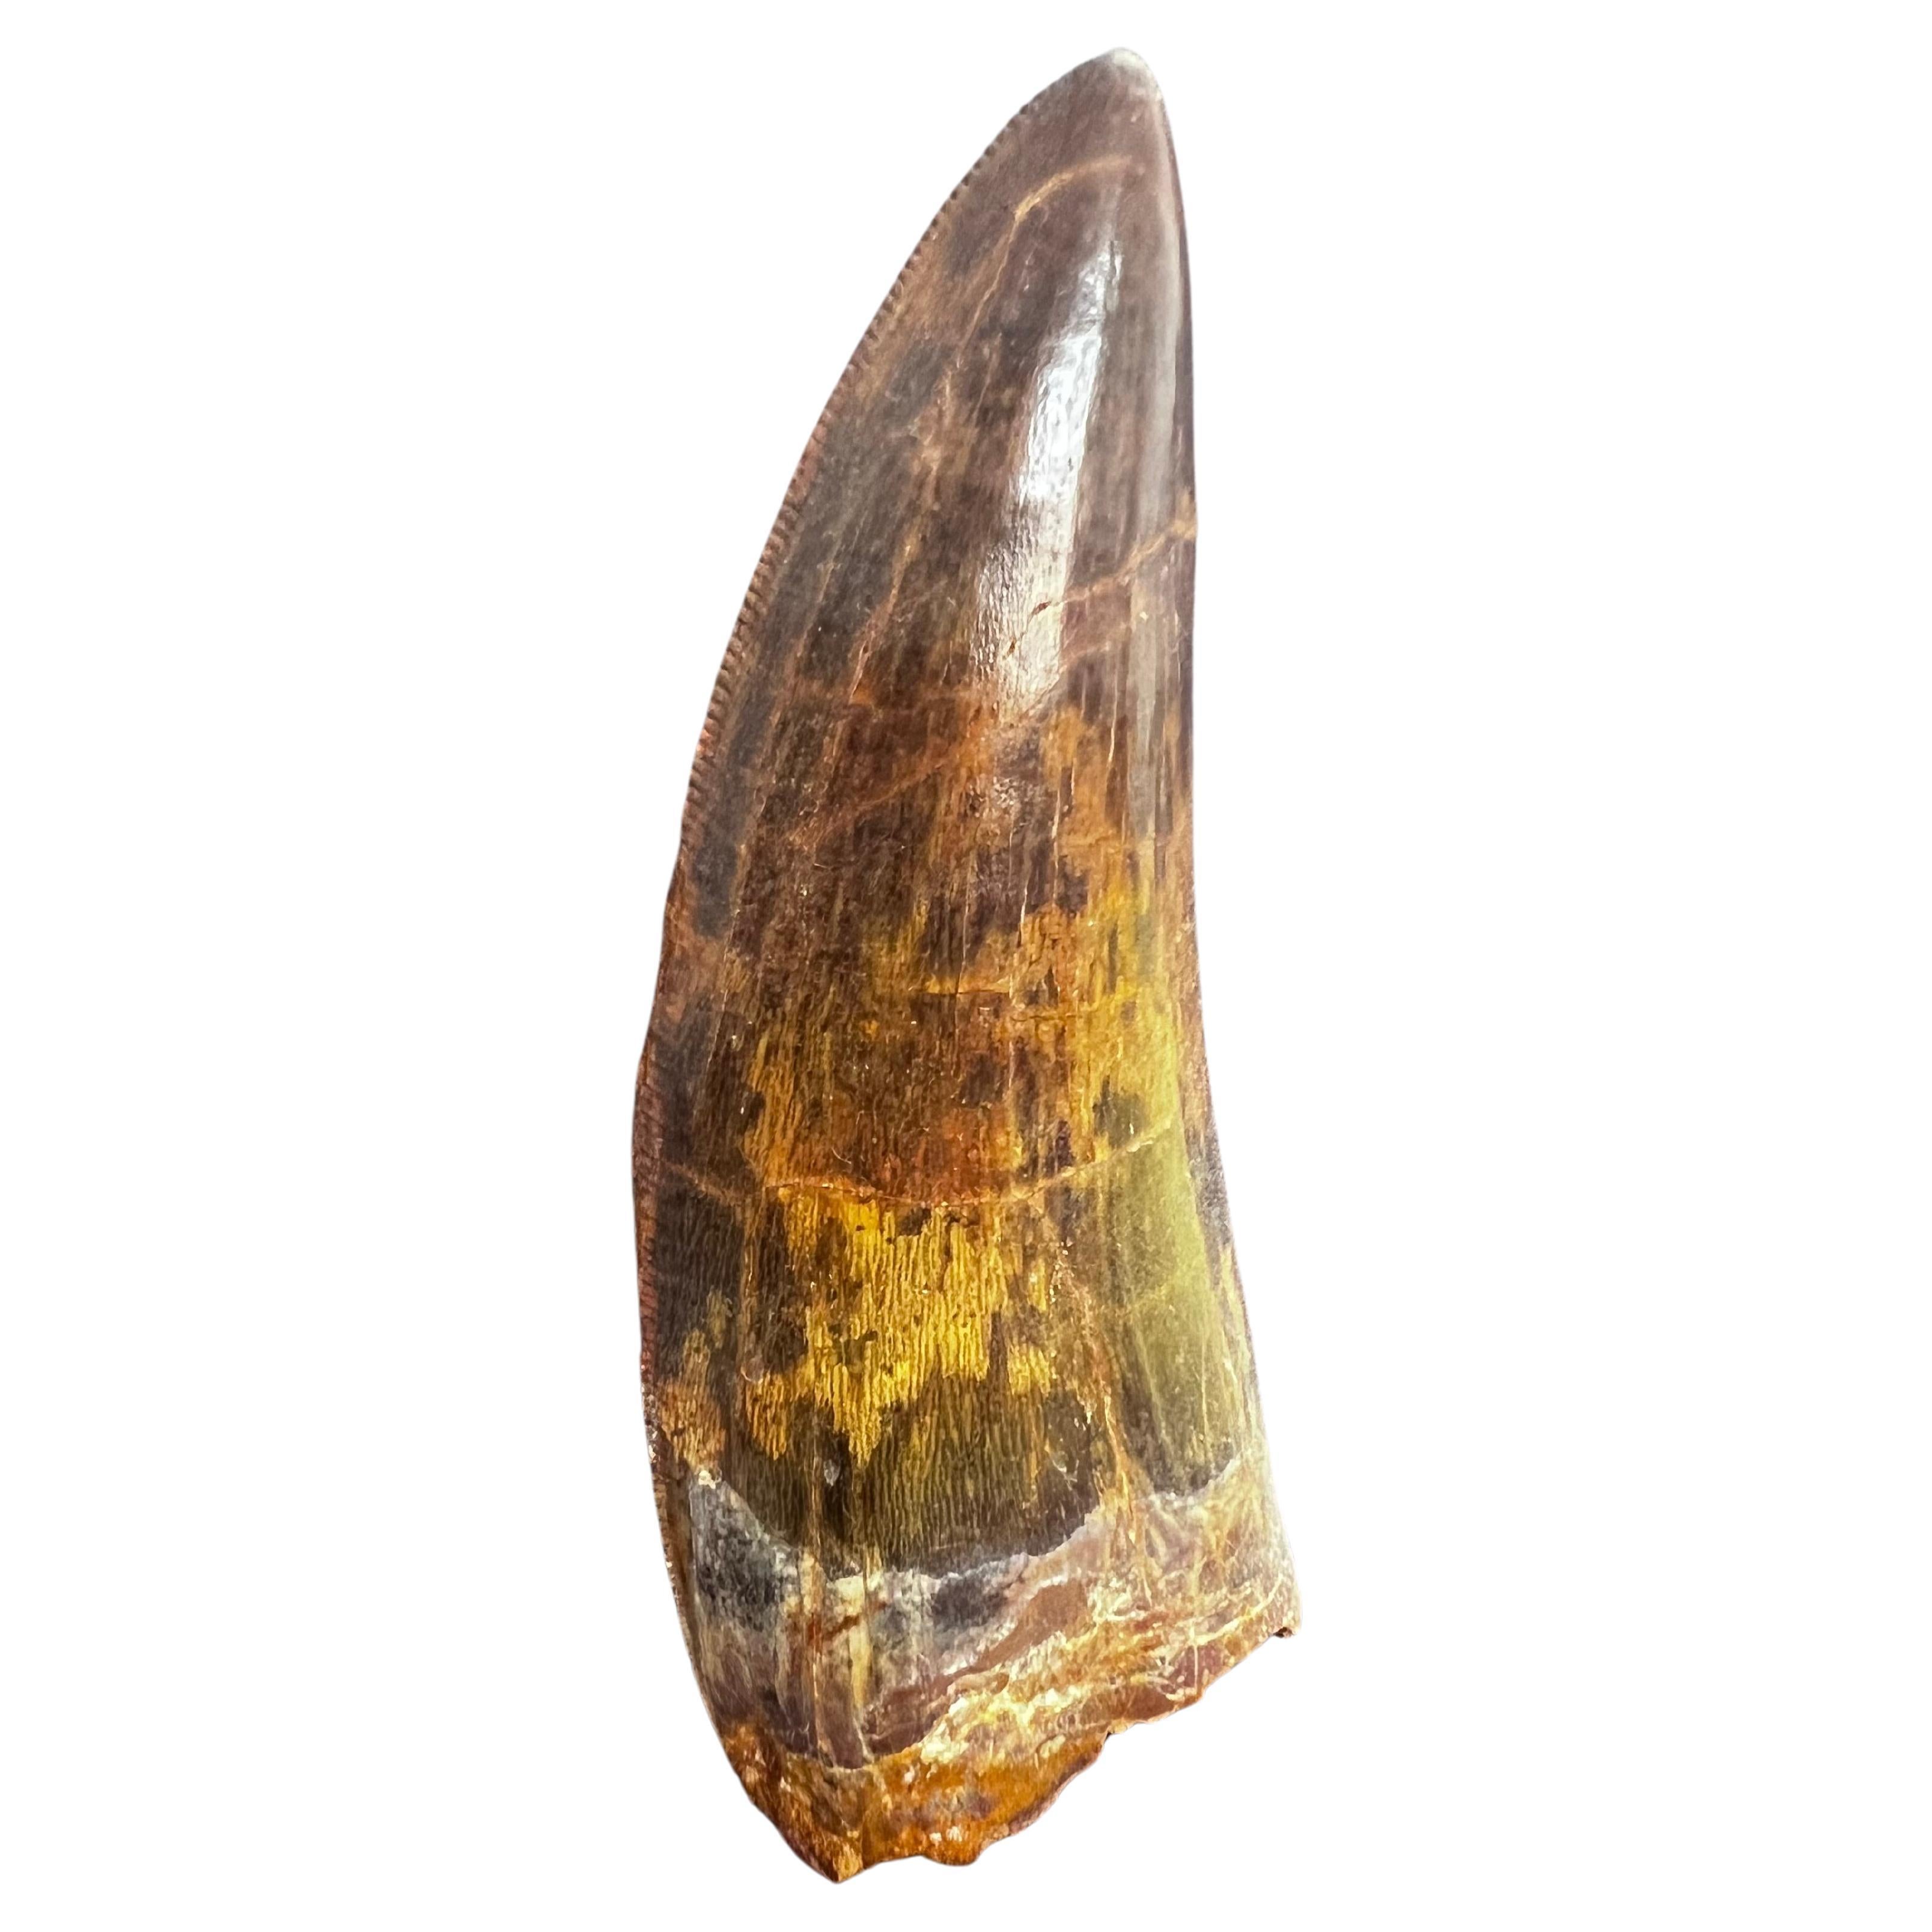 Selected Tooth of Carcharodontosaurus Dinosaur For Sale